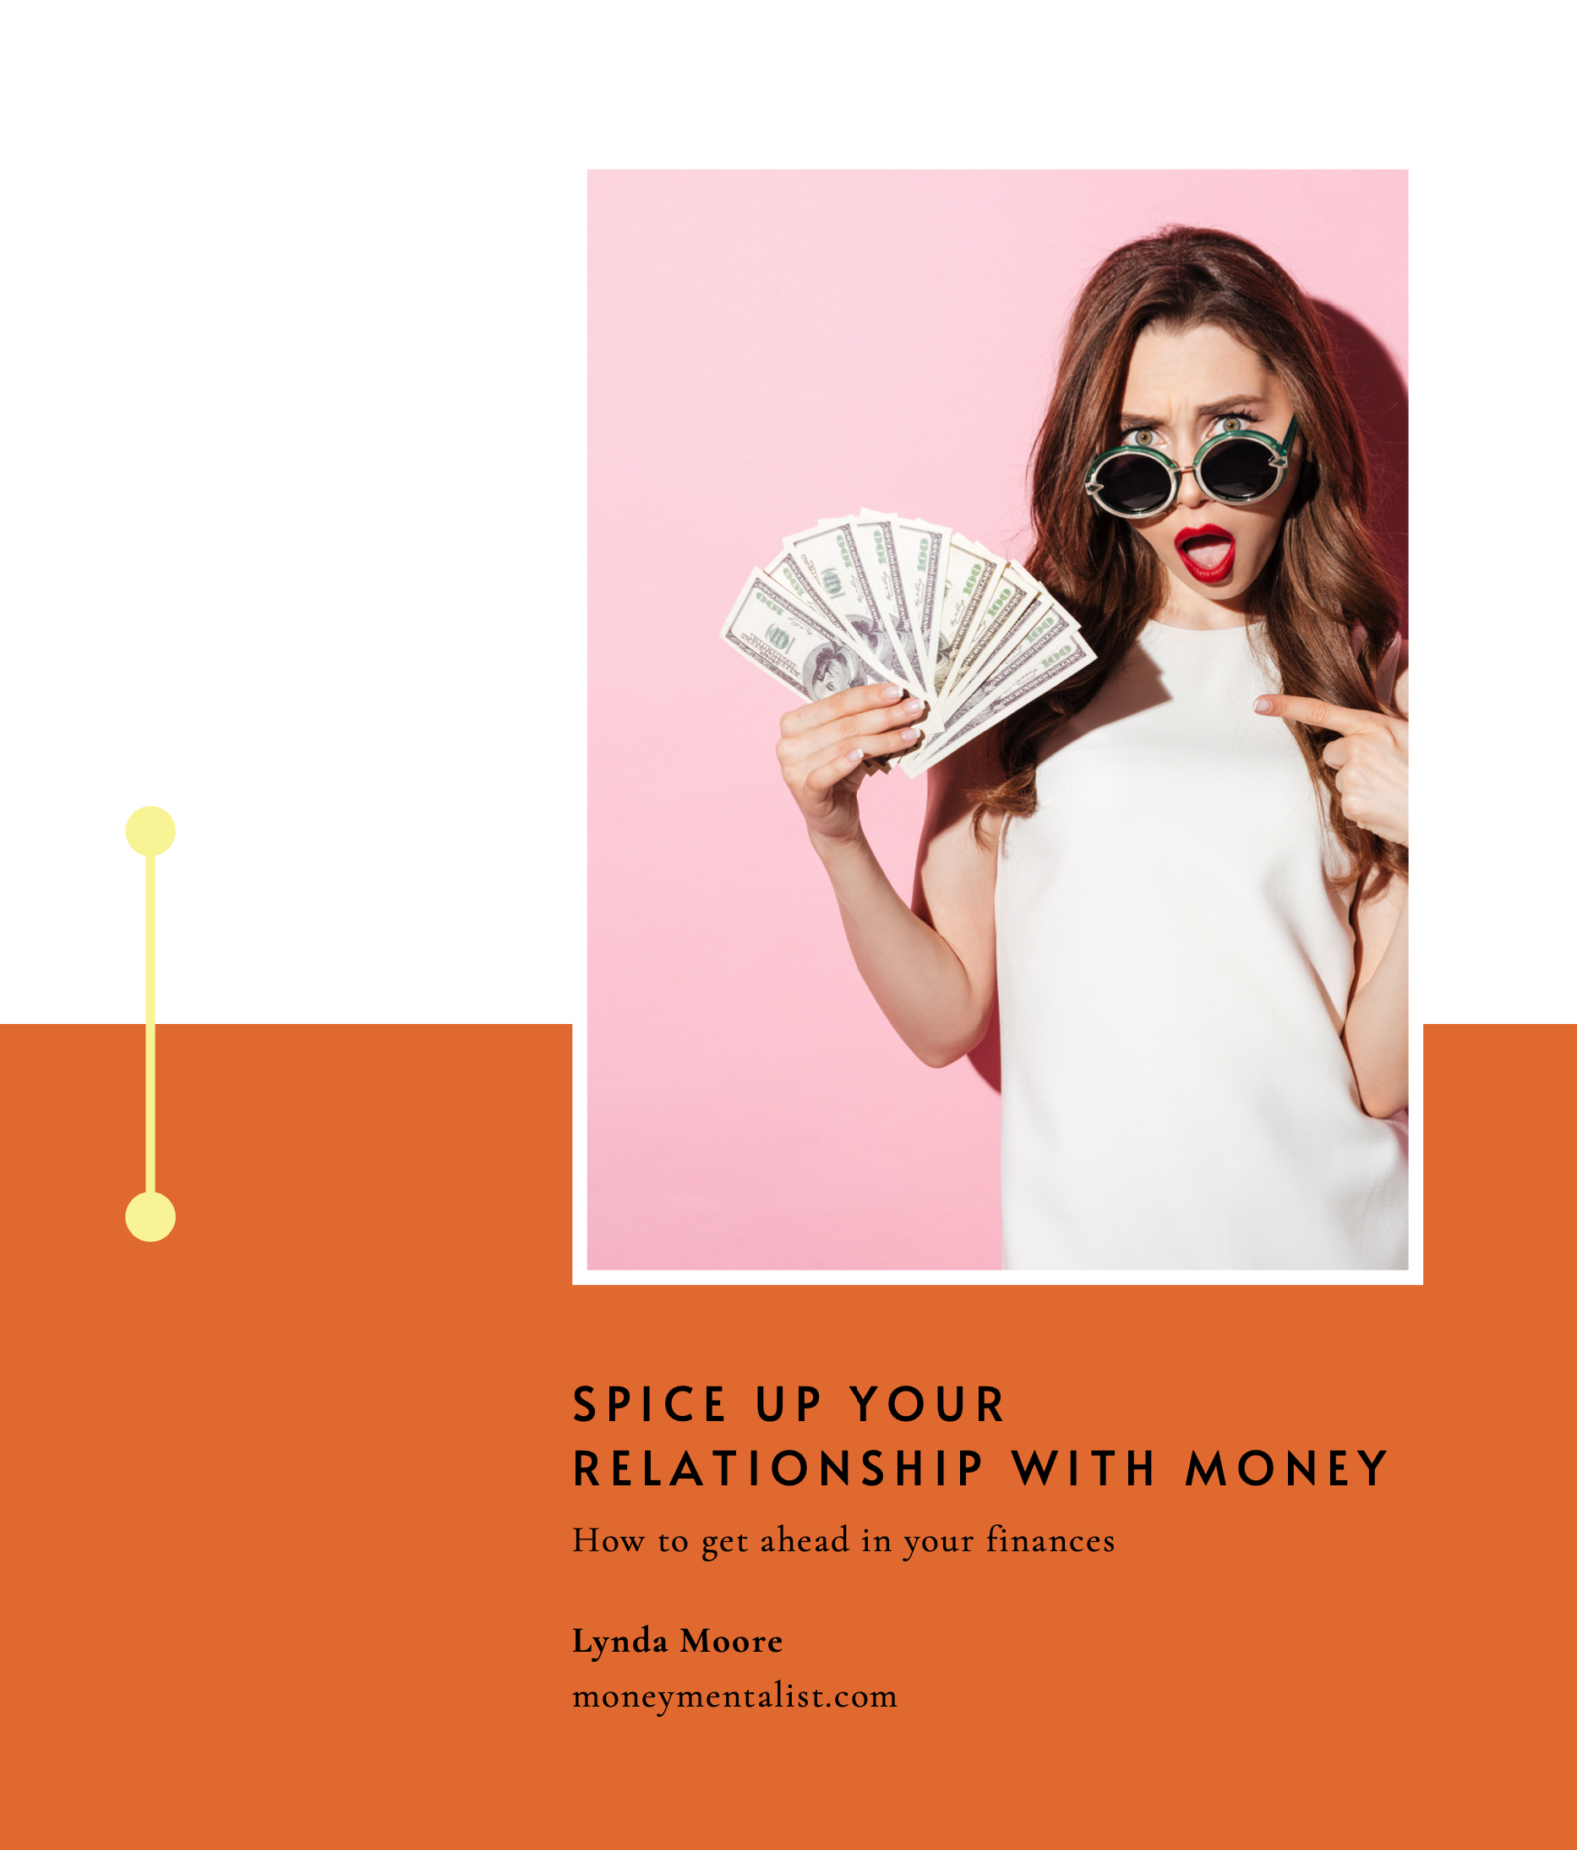 Spice up your relationship with money